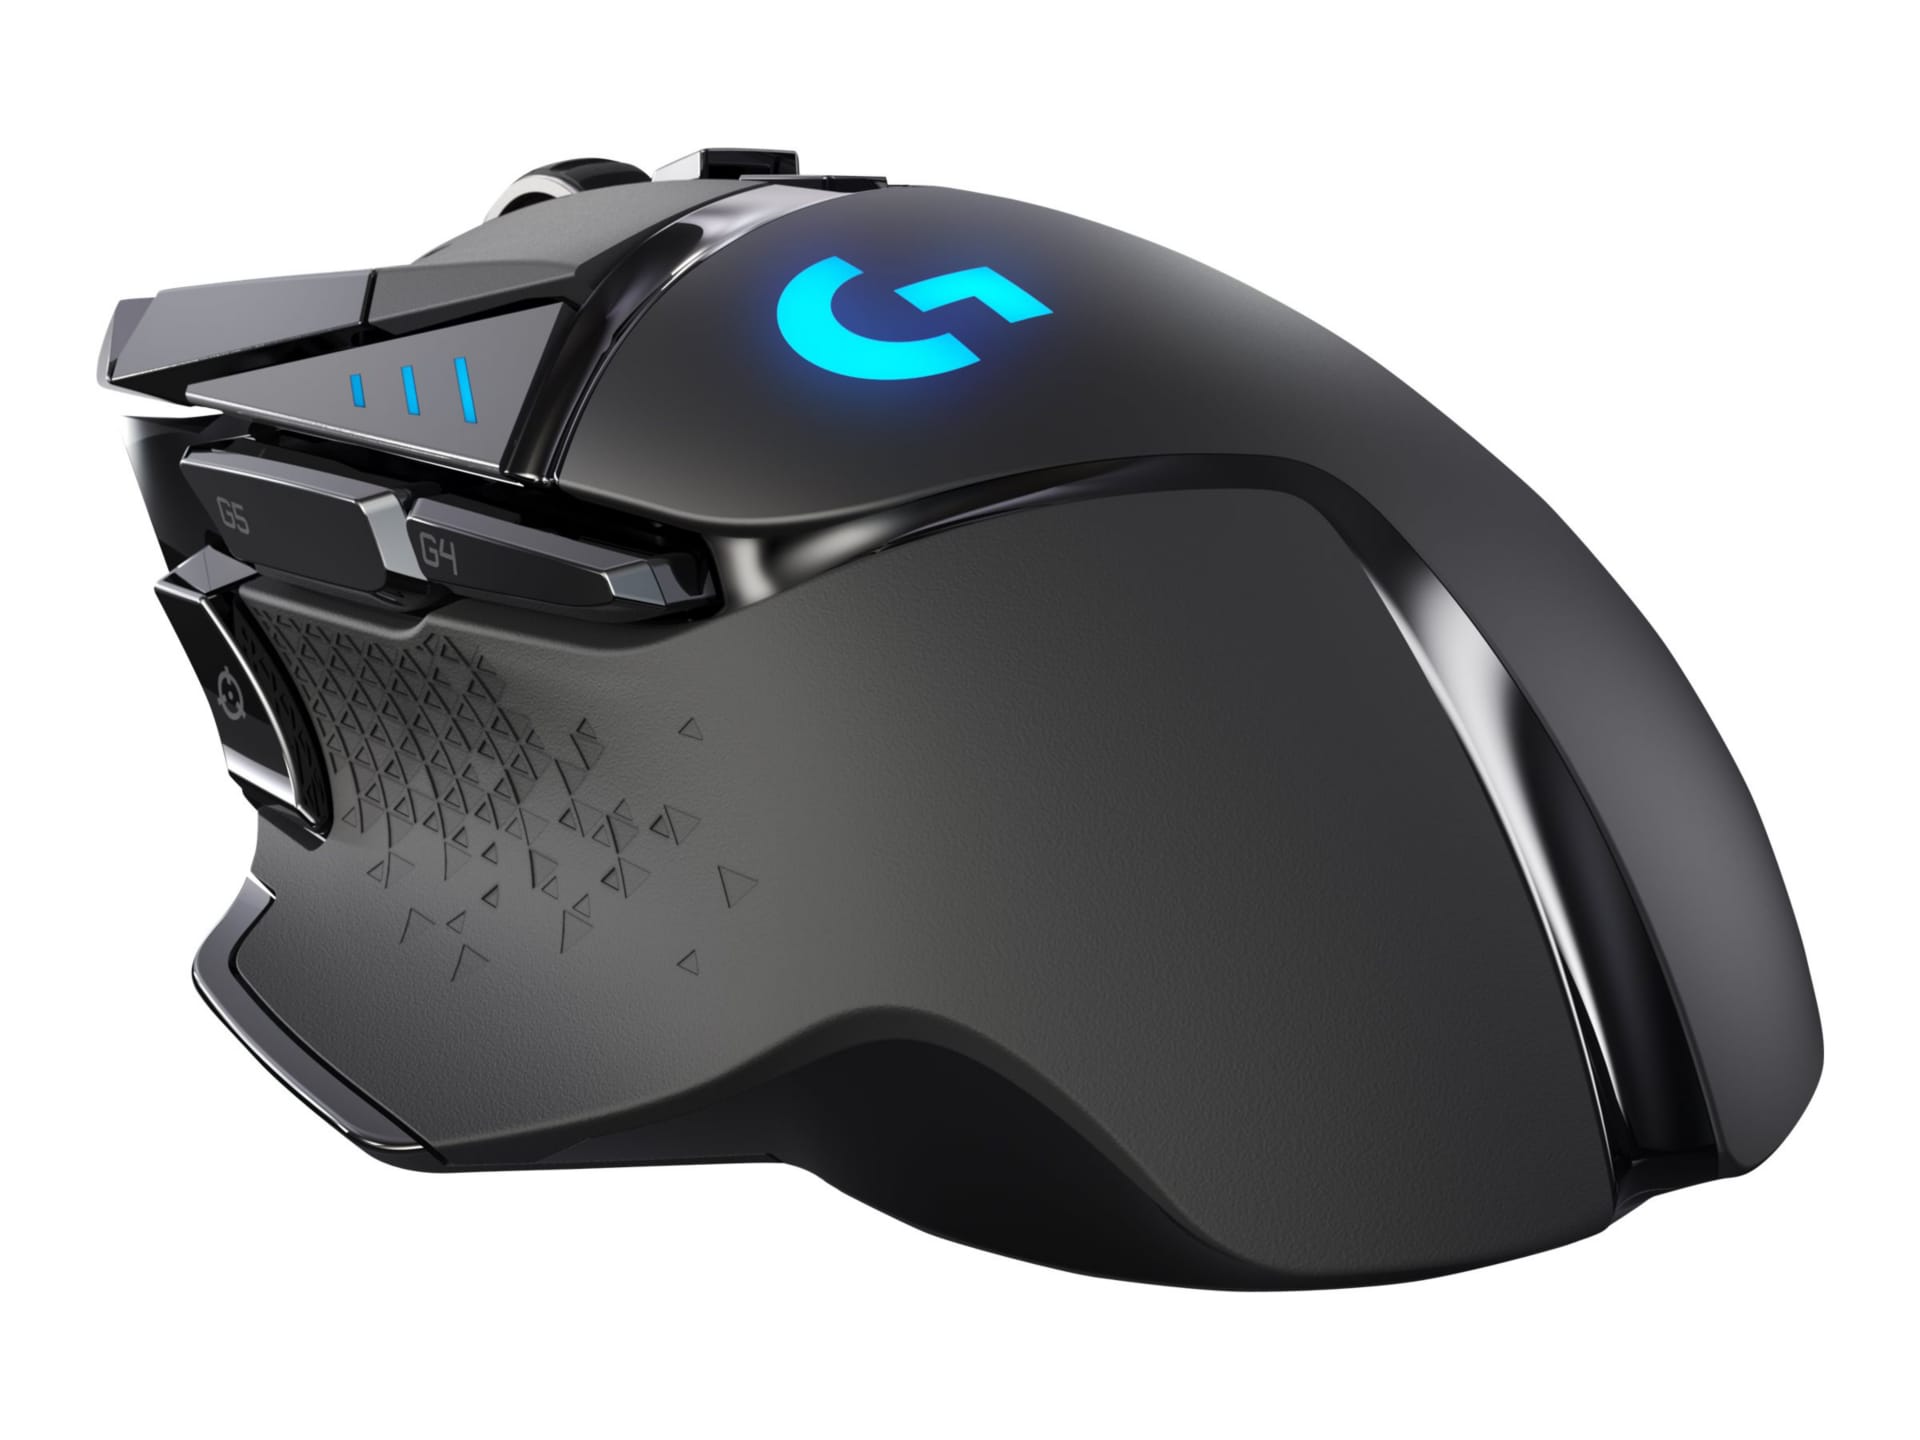 Logitech Wireless Gaming Mouse G502 Lightspeed - mouse - 2,4 GHz